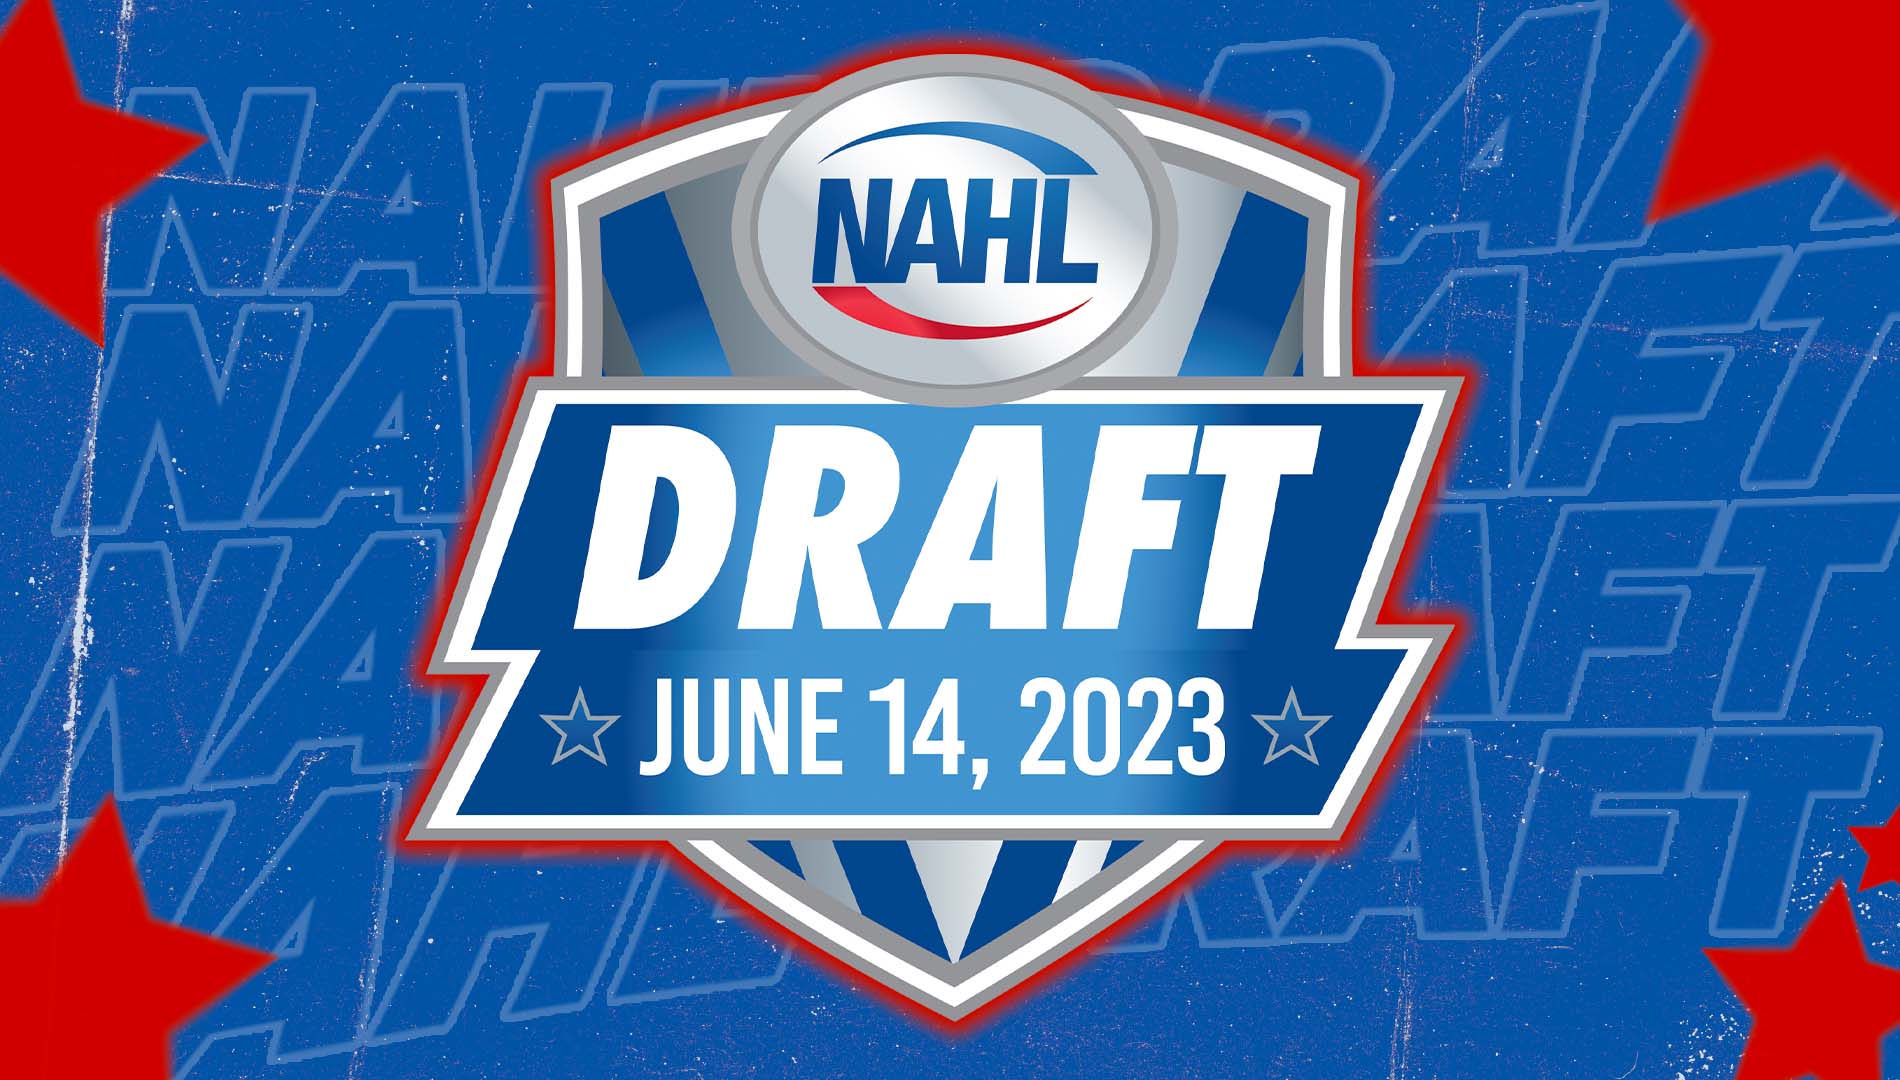 NAHL on Twitter "DRAFT DAY! The 2023 NAHLDraft takes place today at 1